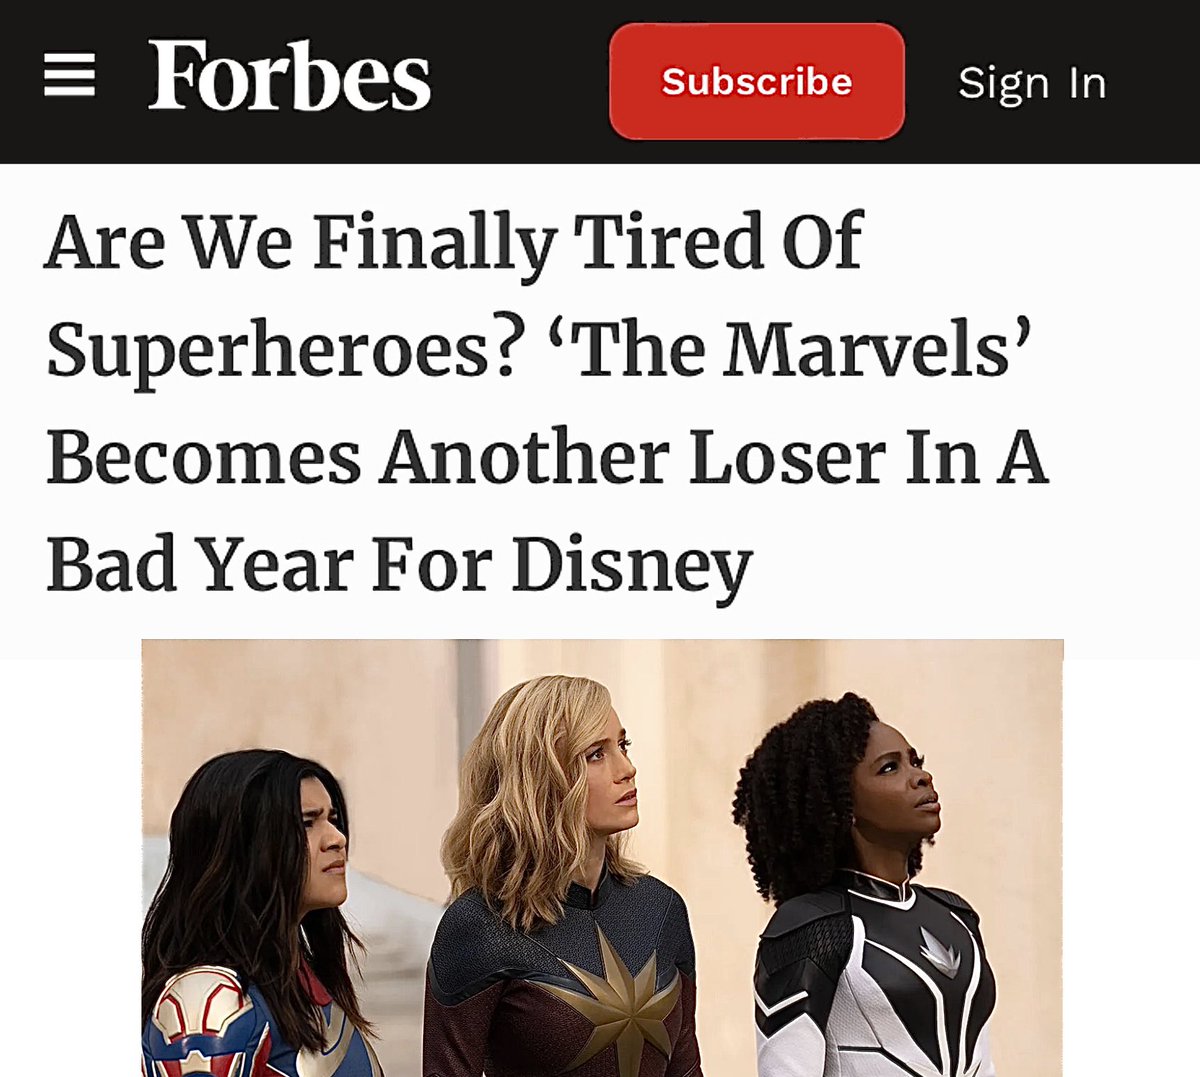 That must be it. Tired of superheroes.